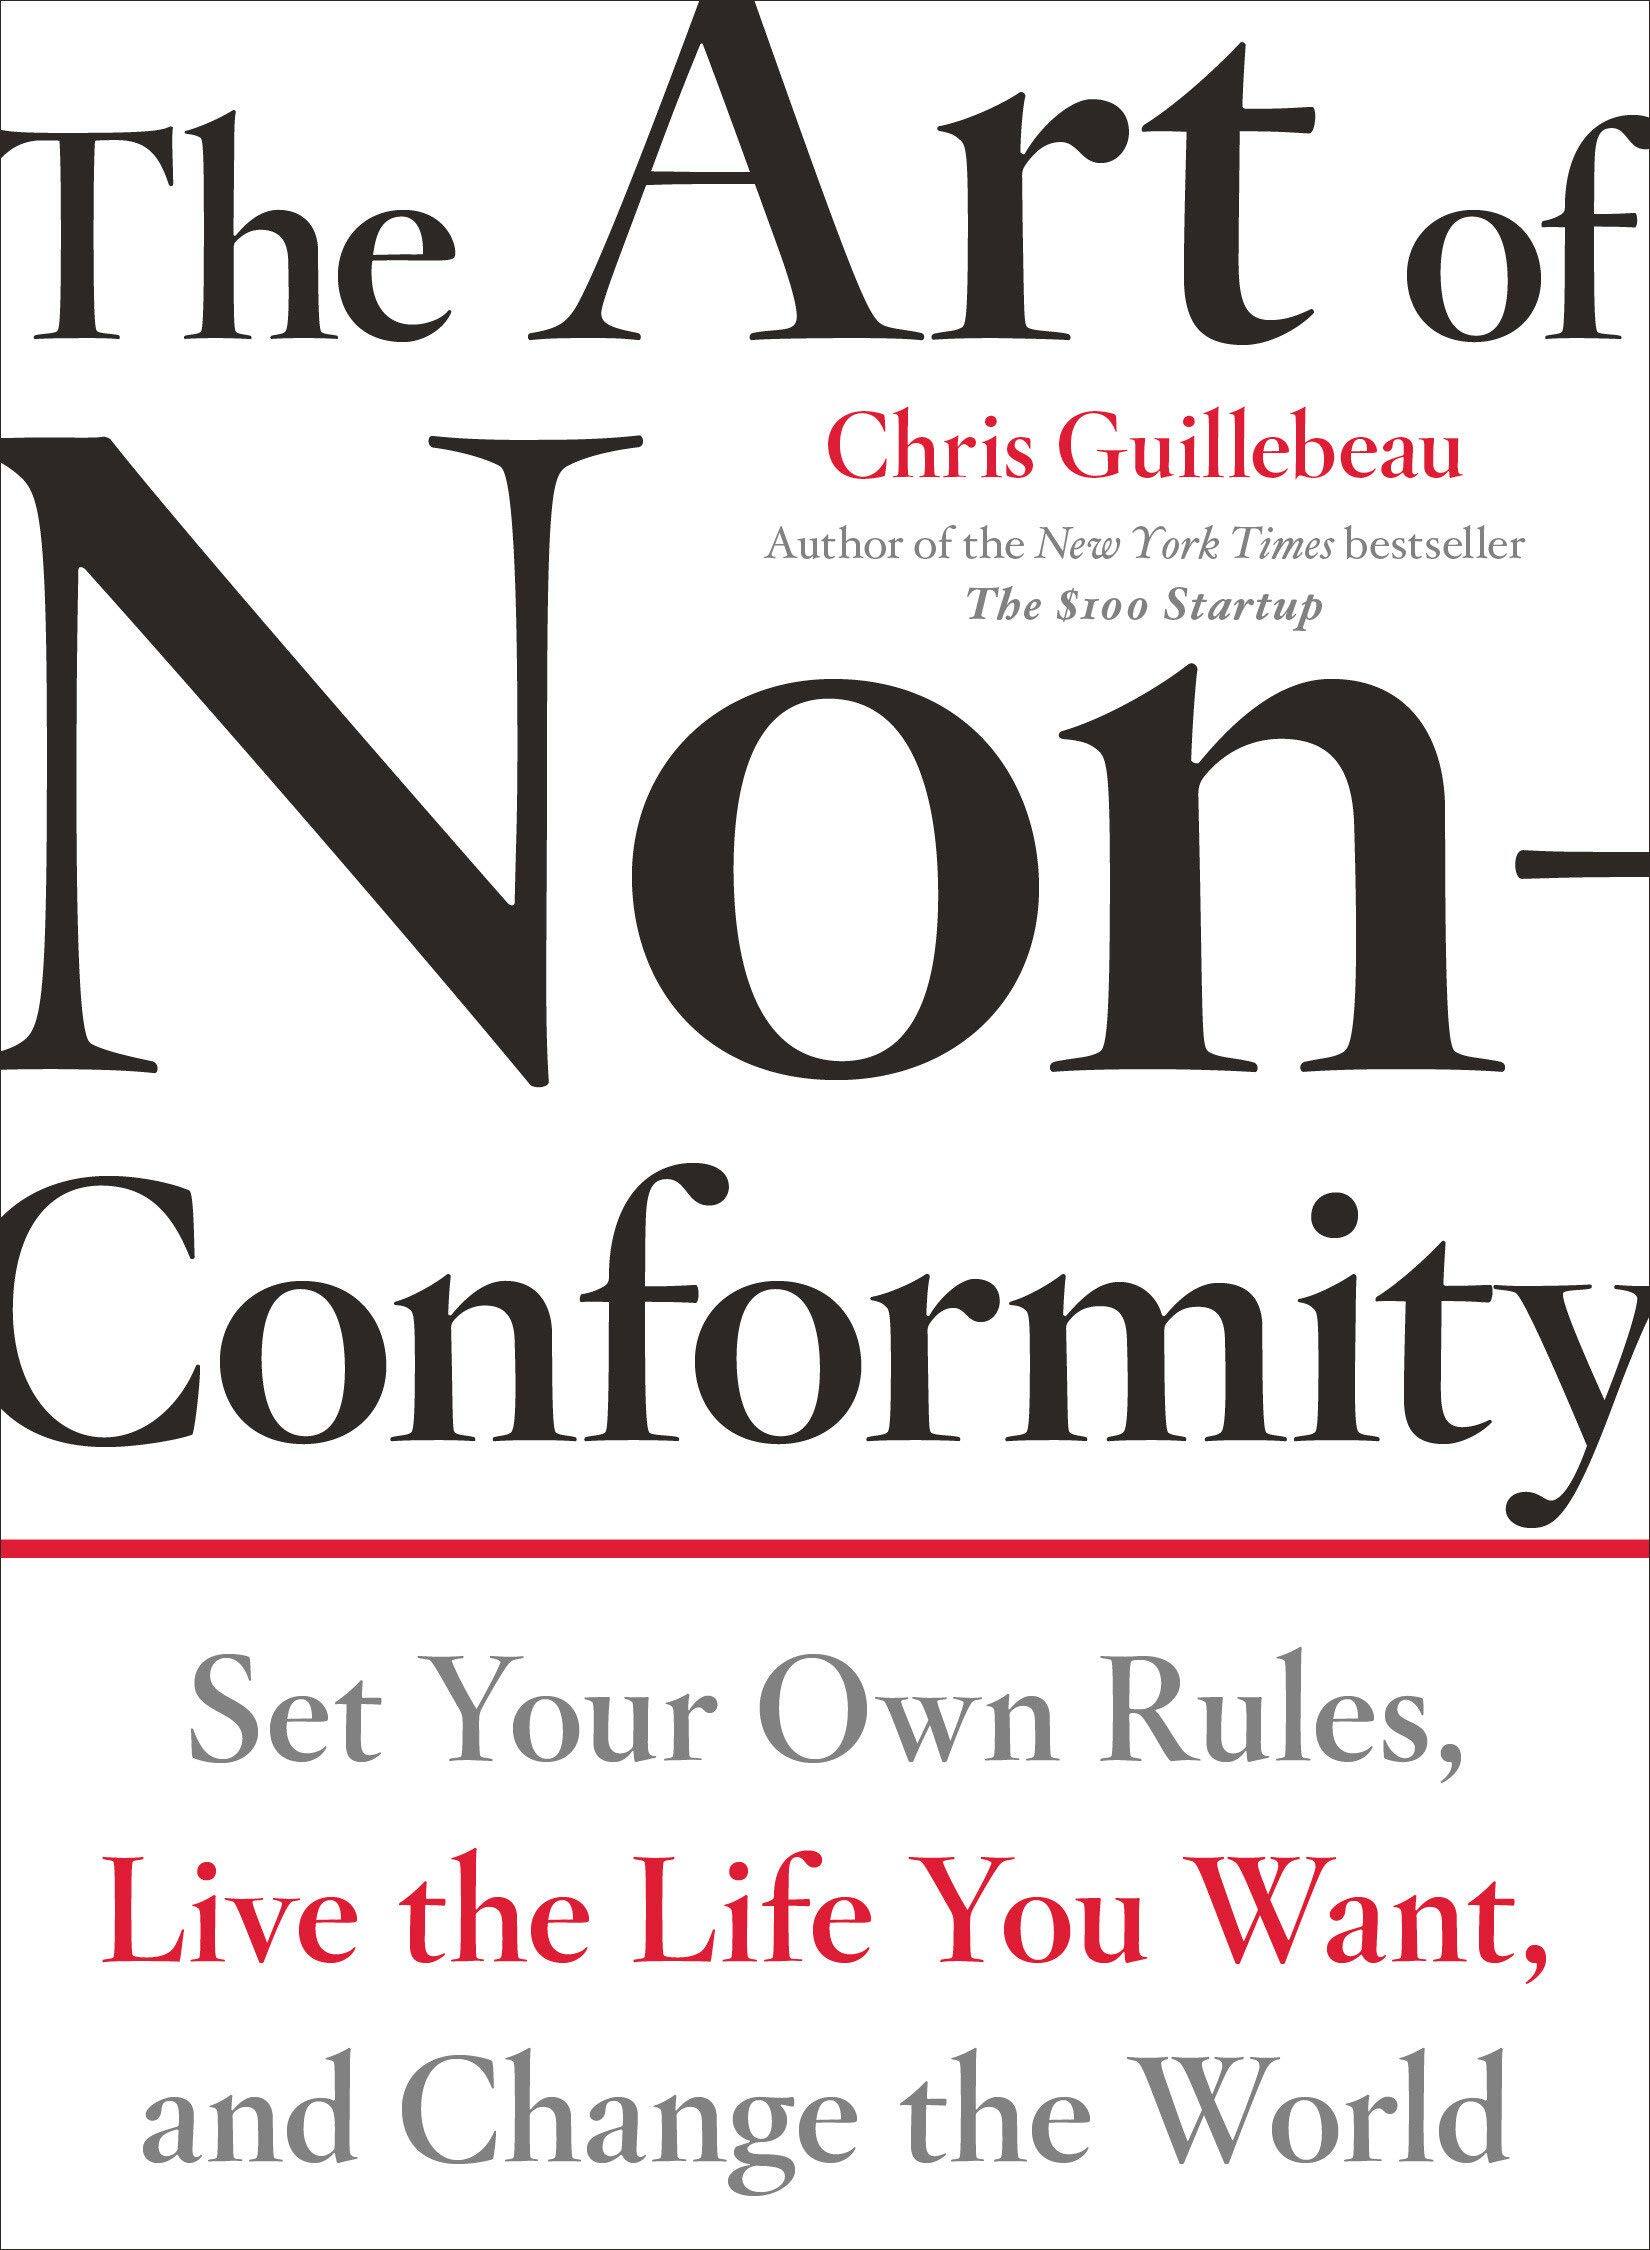 『The Art of Non-Conformity』  ～Set Your Own Rules, Live the Life You Want, and Change the World～